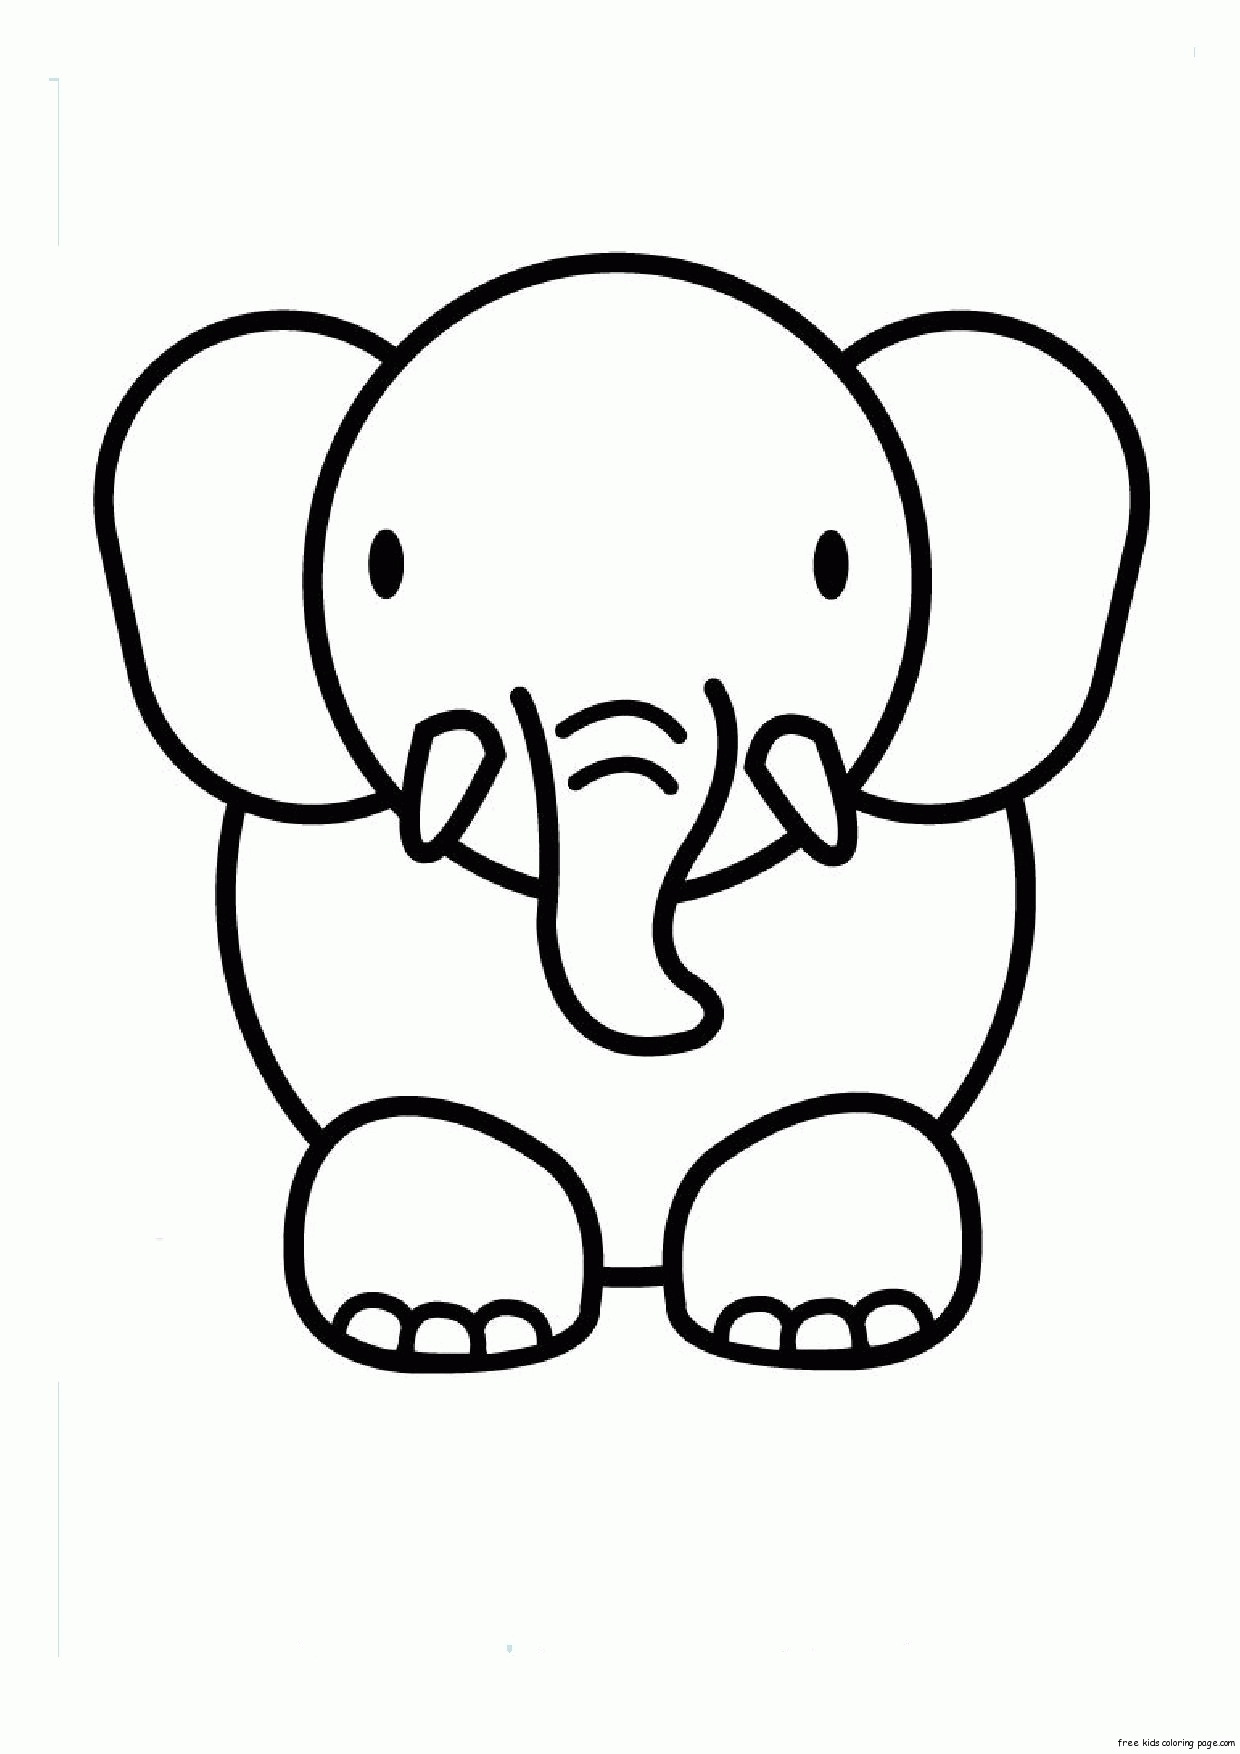 Free Printable Coloring Pages Of Animals - Coloring